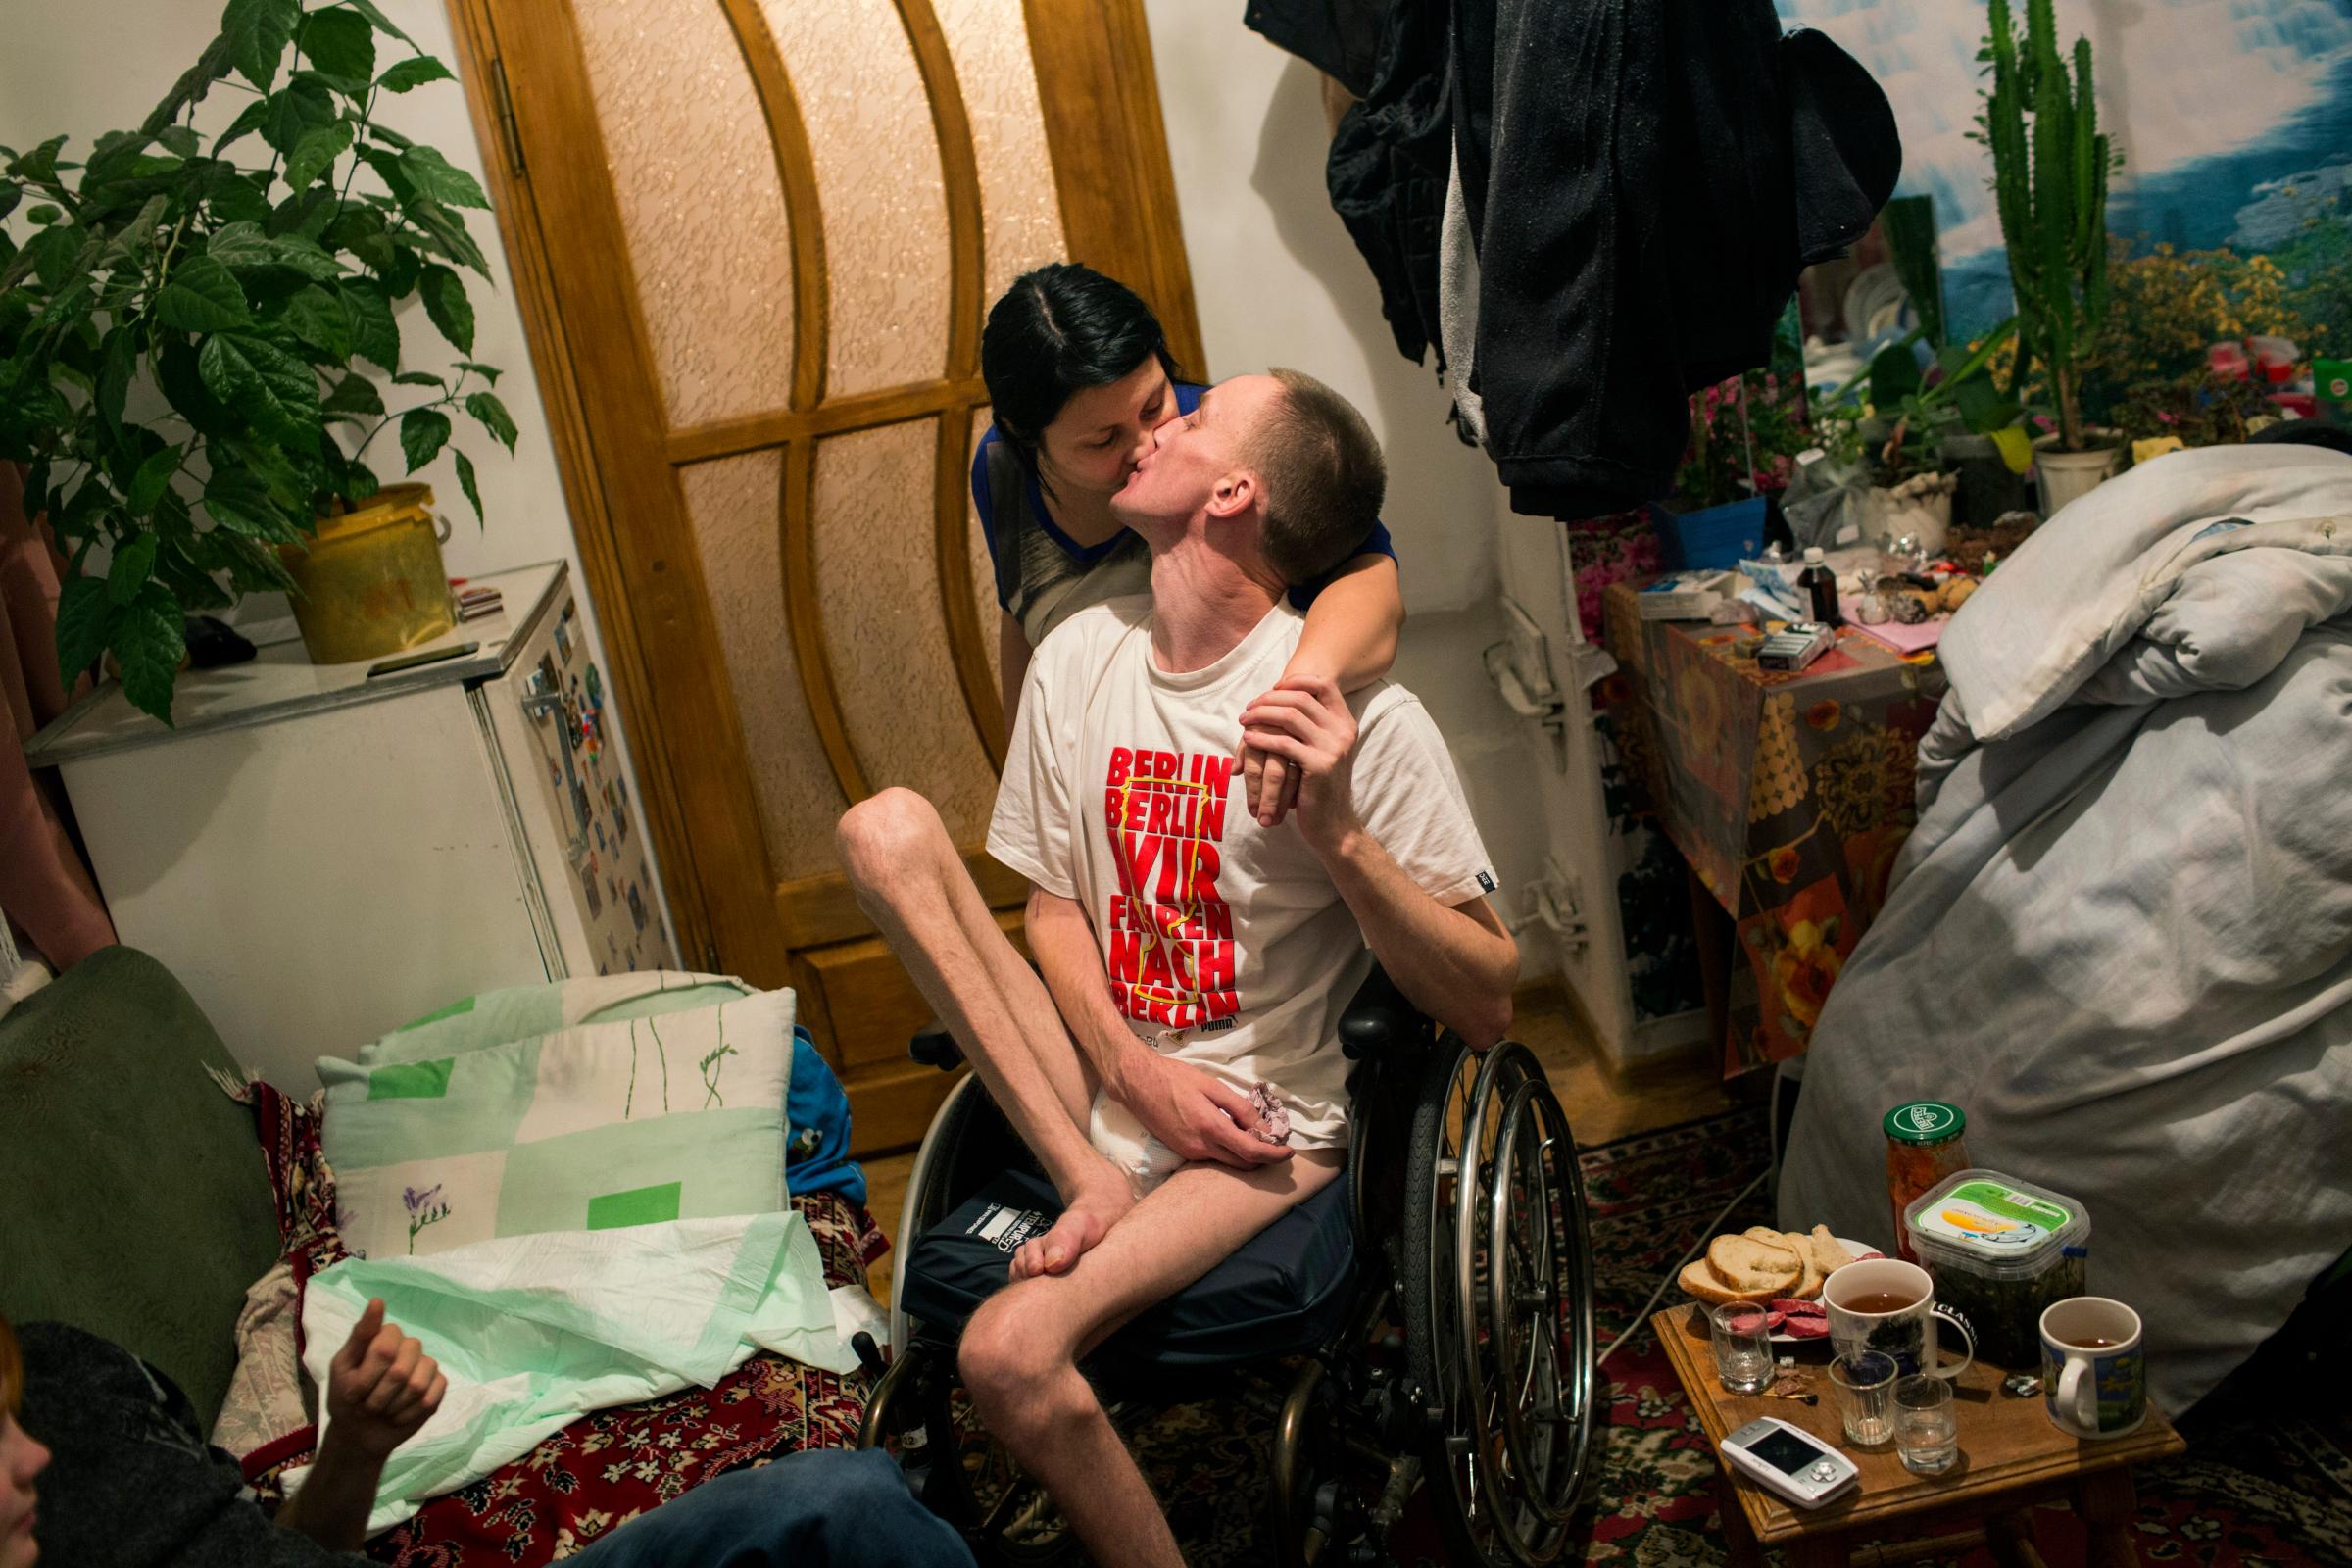 Honcharovsky kisses his wife, Oksana Khivchuk, in their home in Teofipol, Ukraine, Nov. 17, 2014. "Life for us is very difficult at the moment," said Khivchuk. "We hoped that he would slowly begin to walk again, but as you see, there have been no changes."